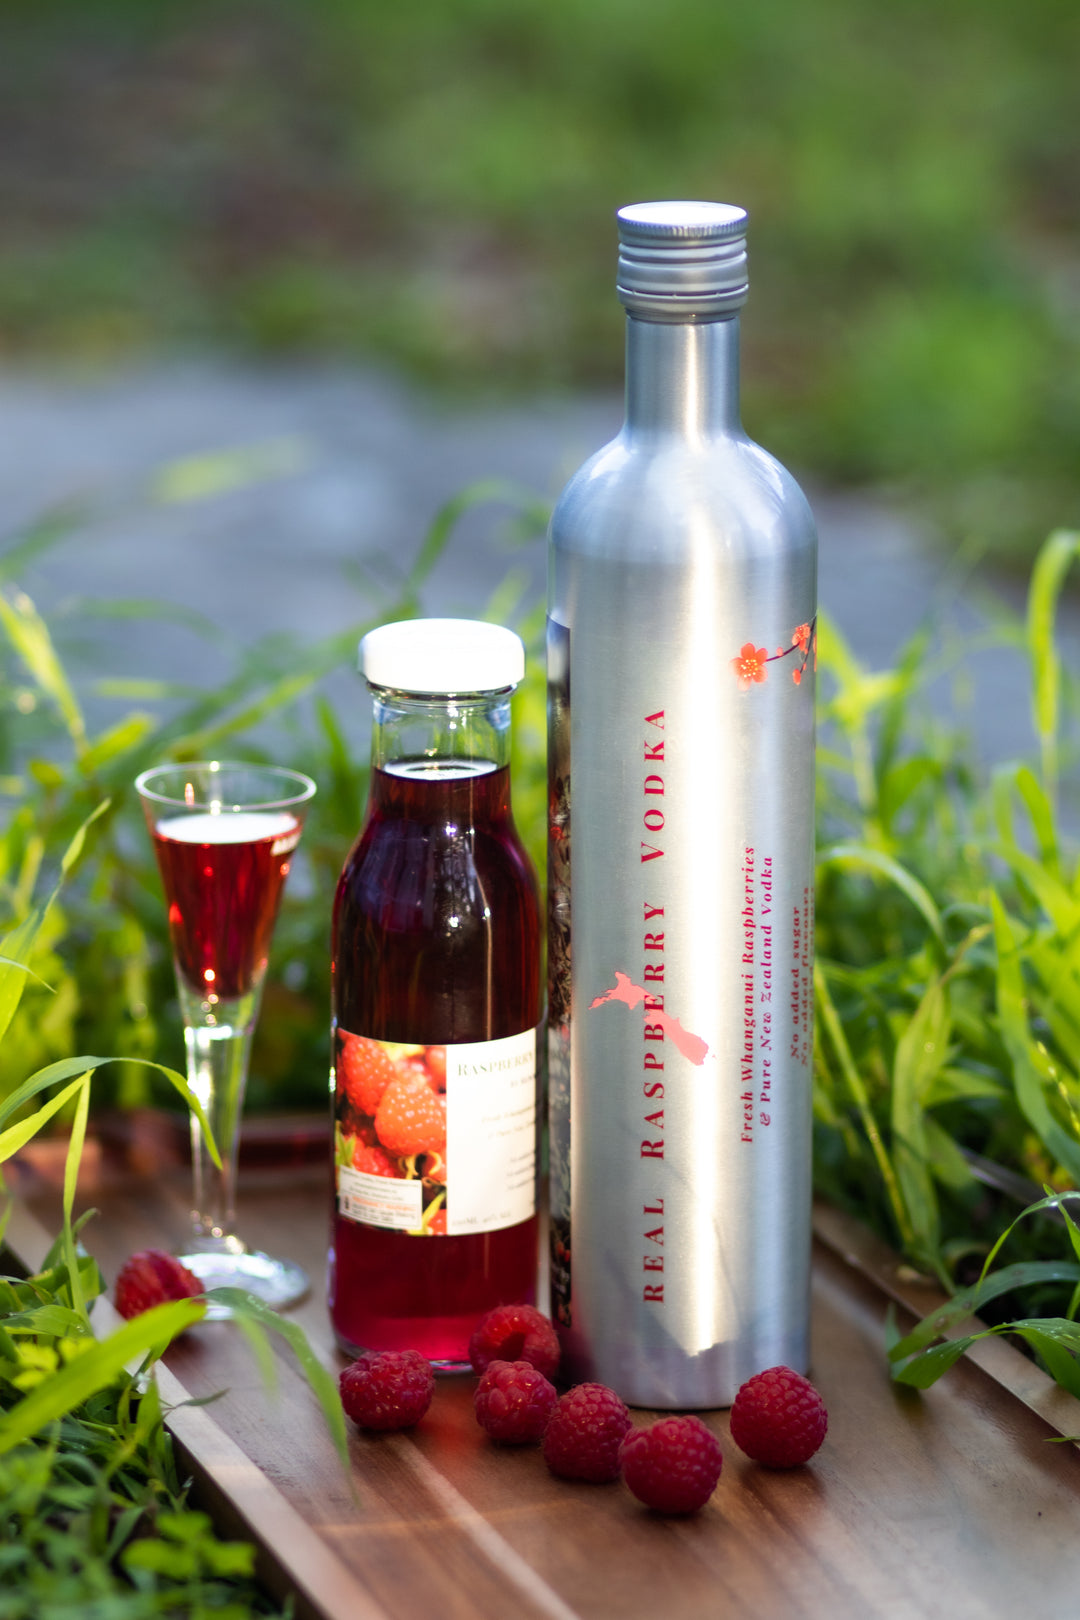 Real Raspberry Vodka By Remarkable Cream 40%ABV